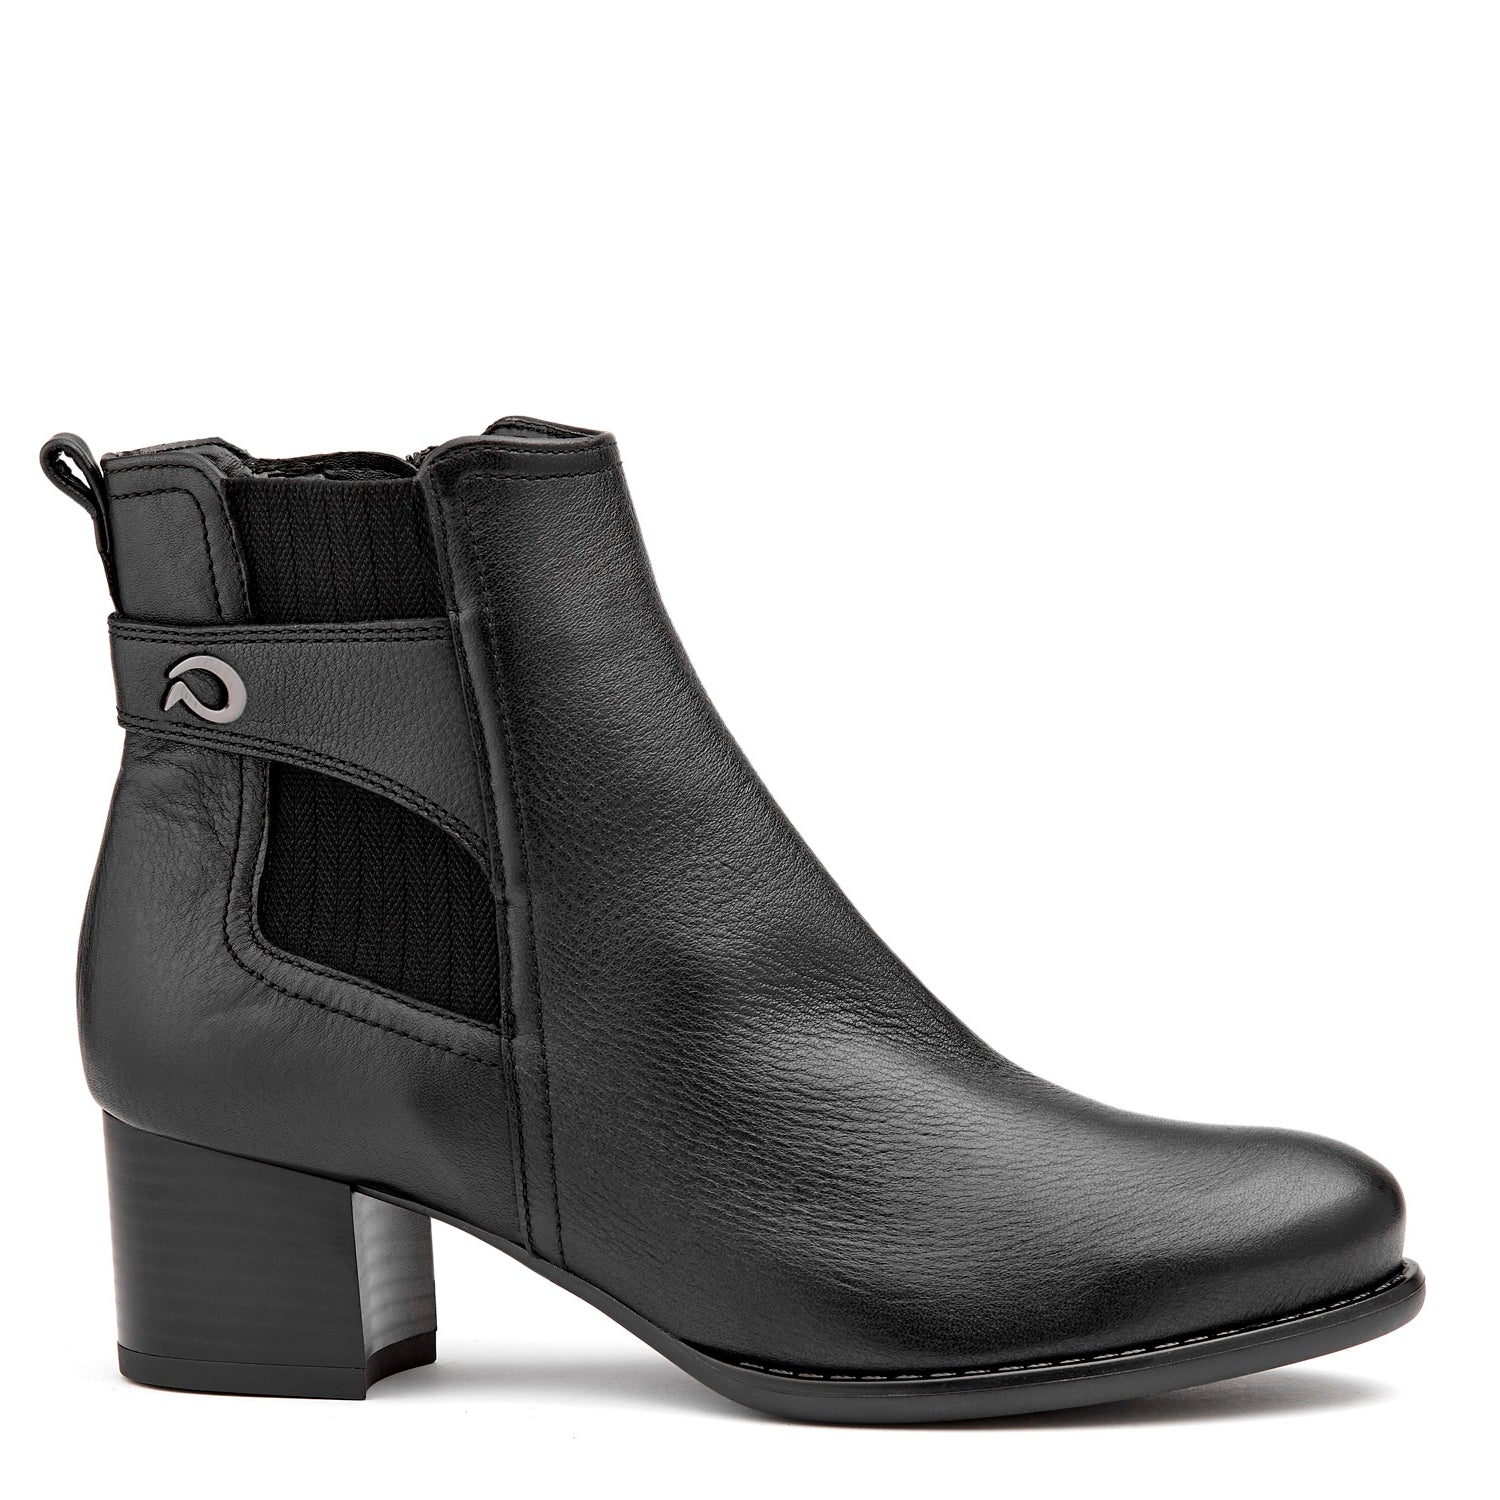 Shop LUCA 05 - BLACK LEATHER by ARA - Ian's Shoes for Women